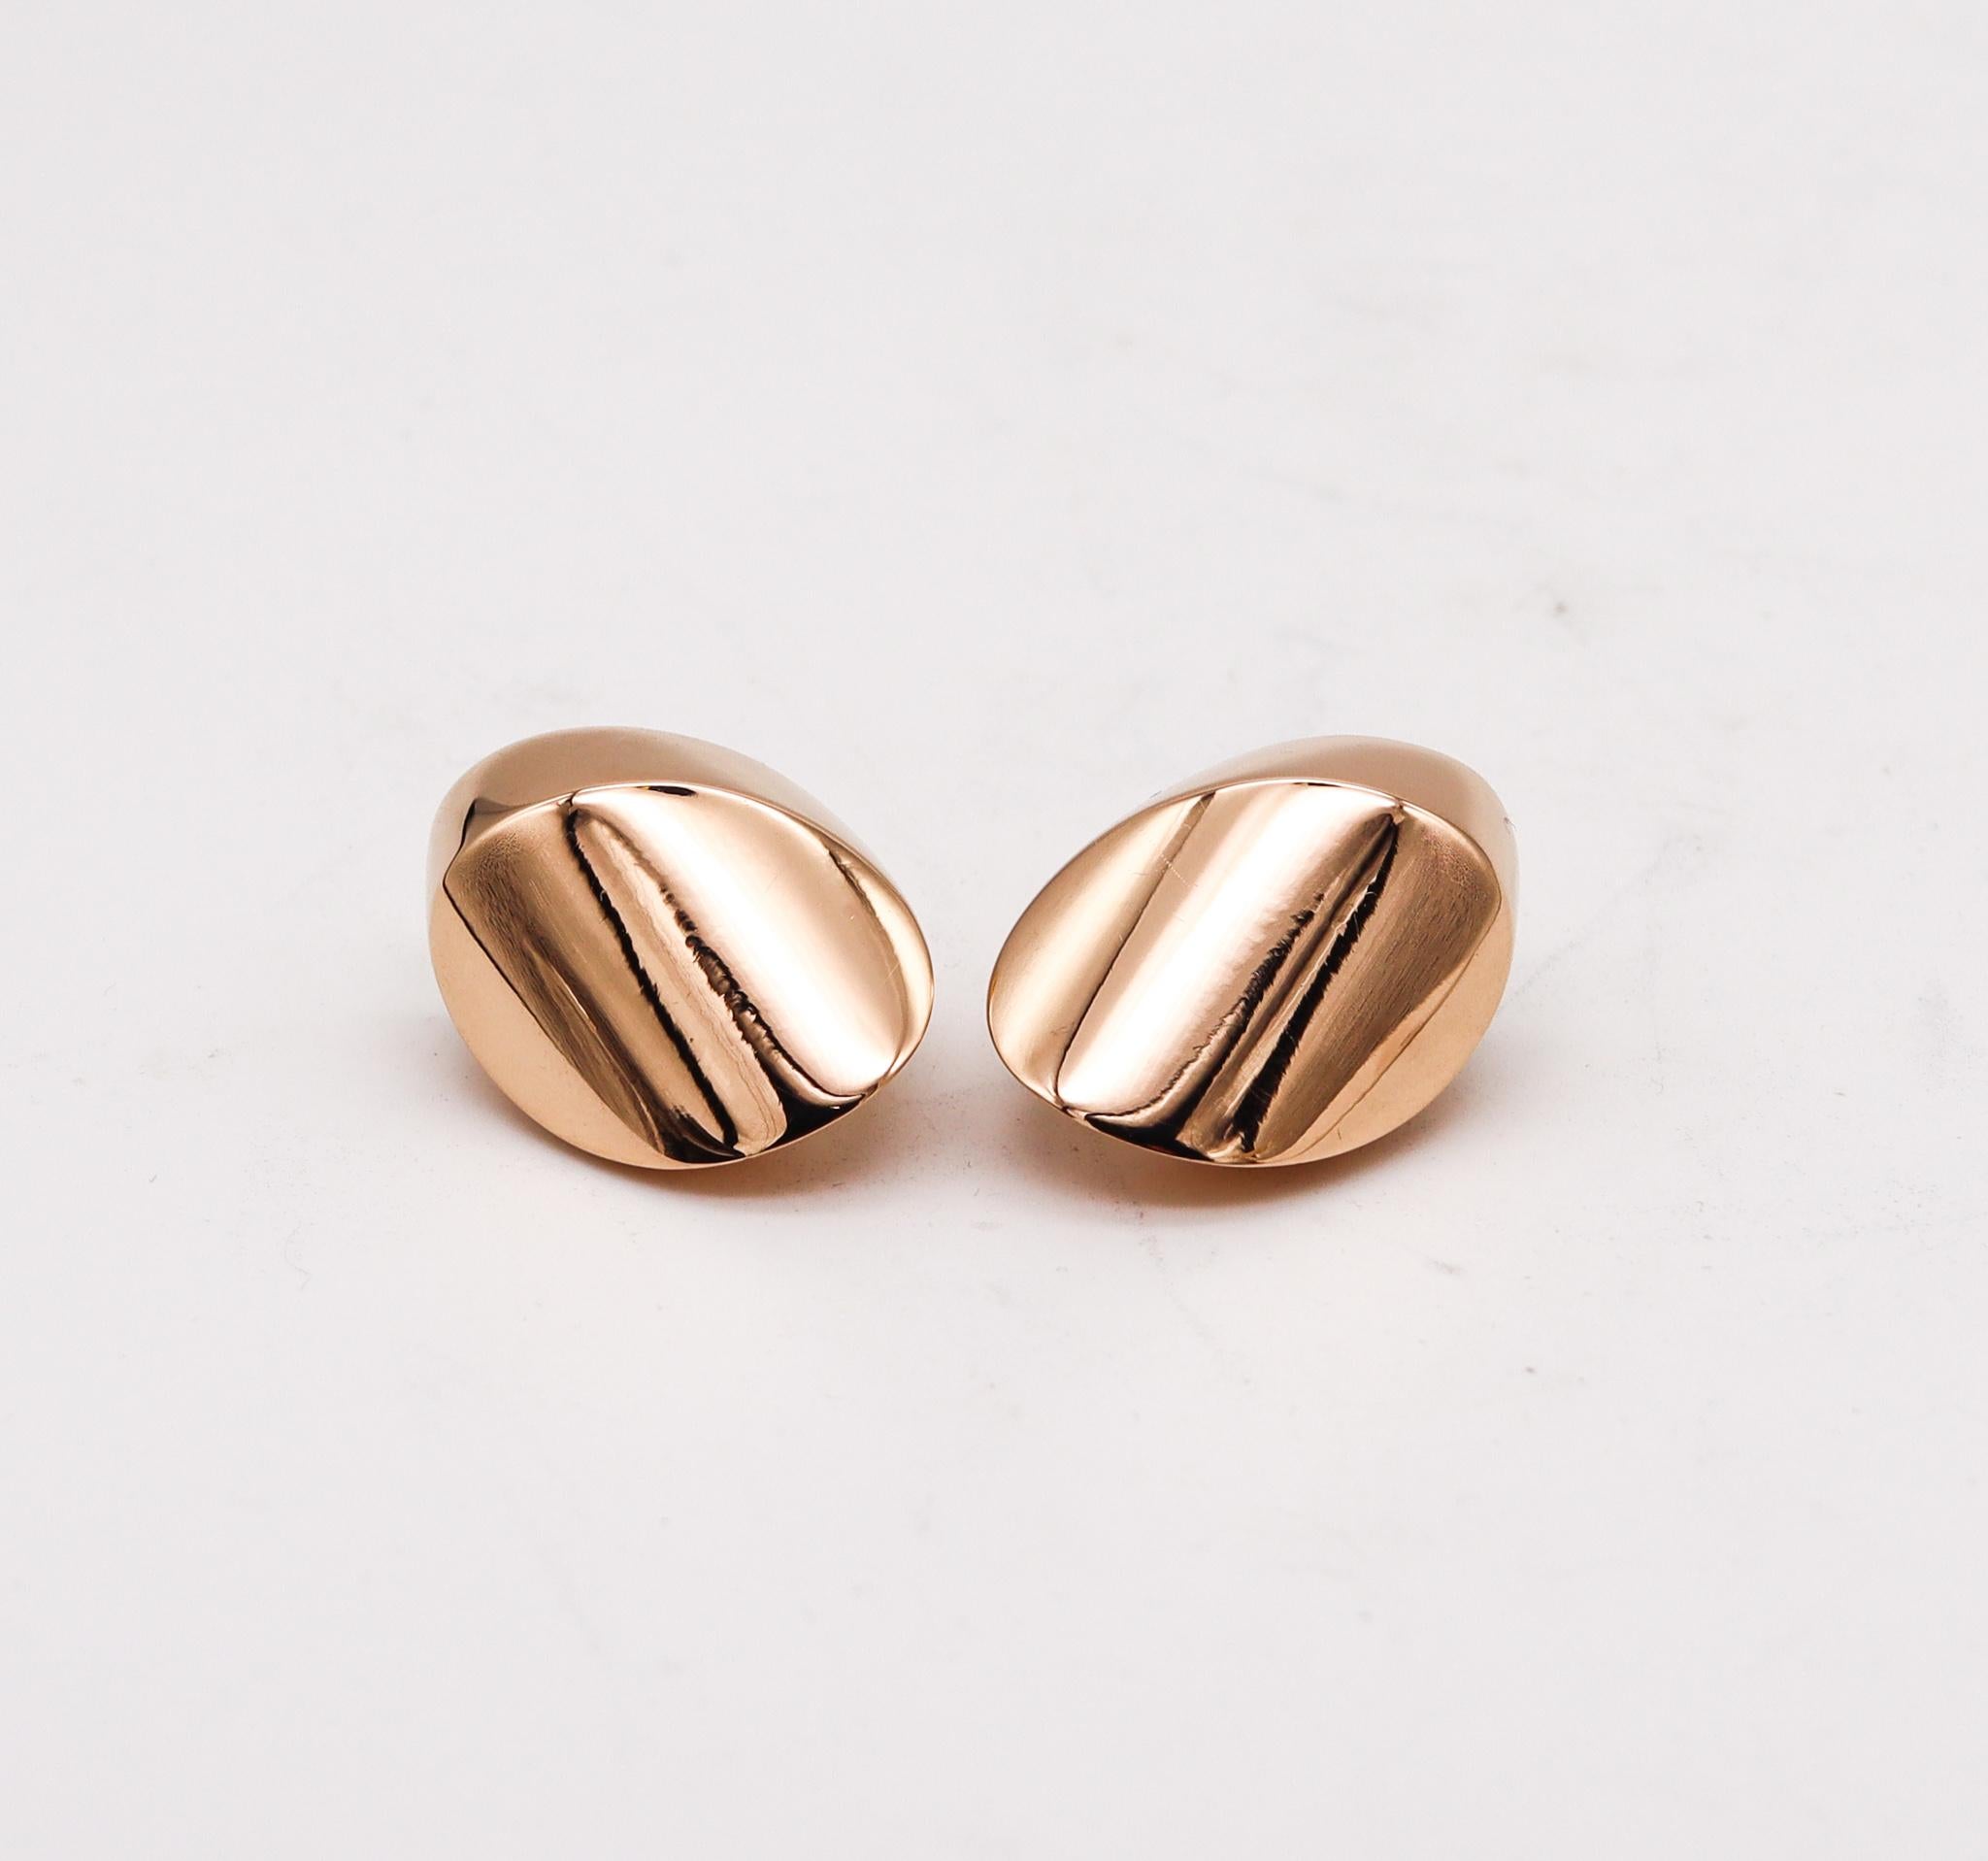 Vhernier Modernist Sculptural Clip On Earrings In Solid 18Kt Yellow Gold In Excellent Condition For Sale In Miami, FL